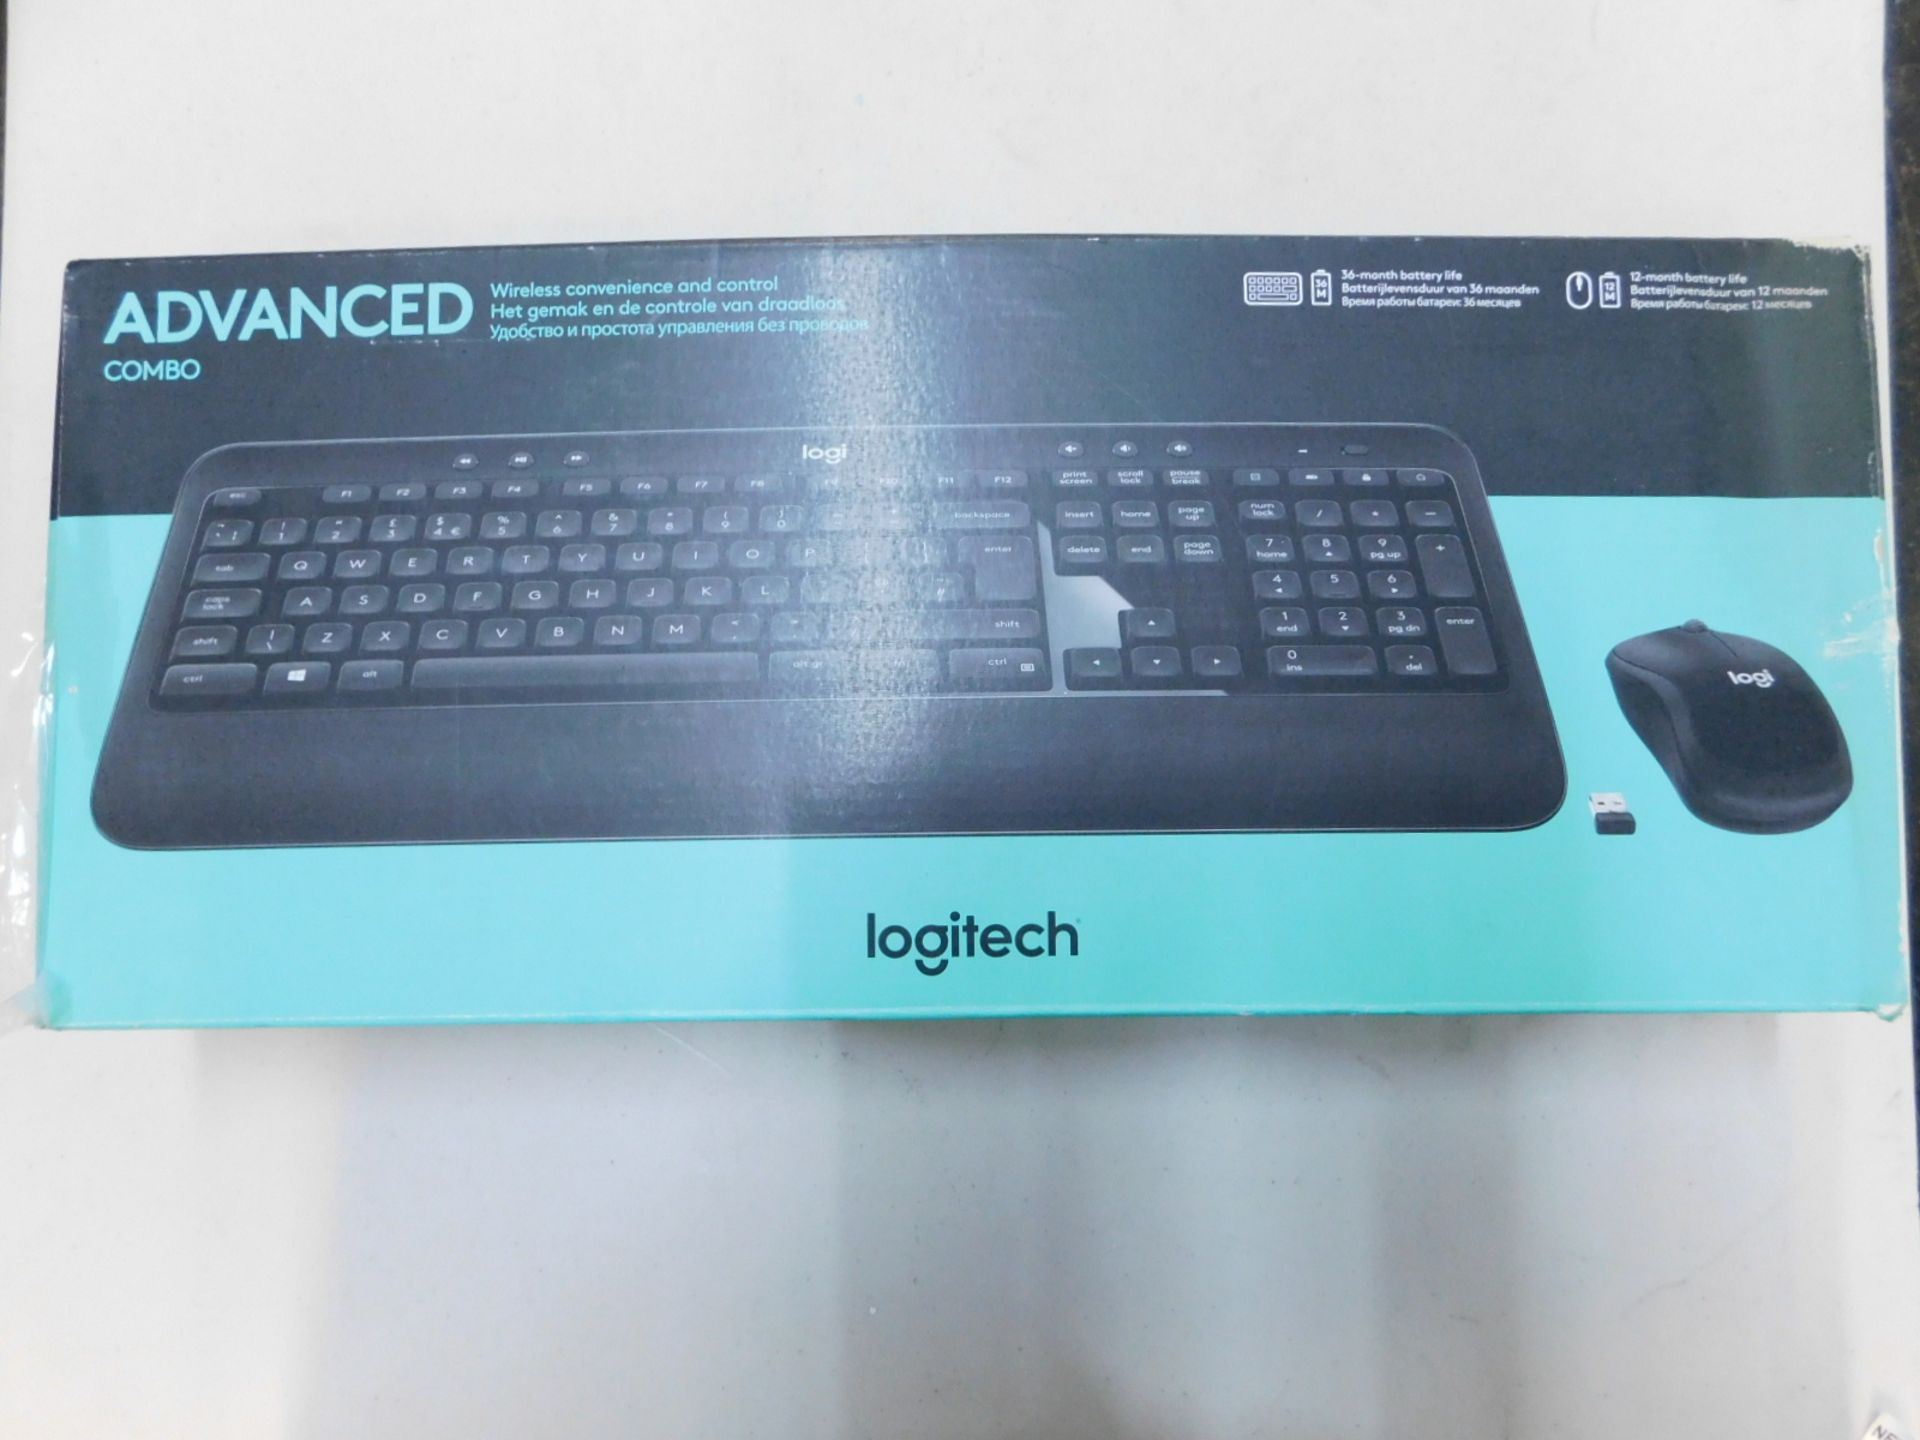 1 BOXED LOGITECH ADVANCED COMBO WIRELESS KEYBOARD AND MOUSE RRP Â£39.99 - Image 2 of 2